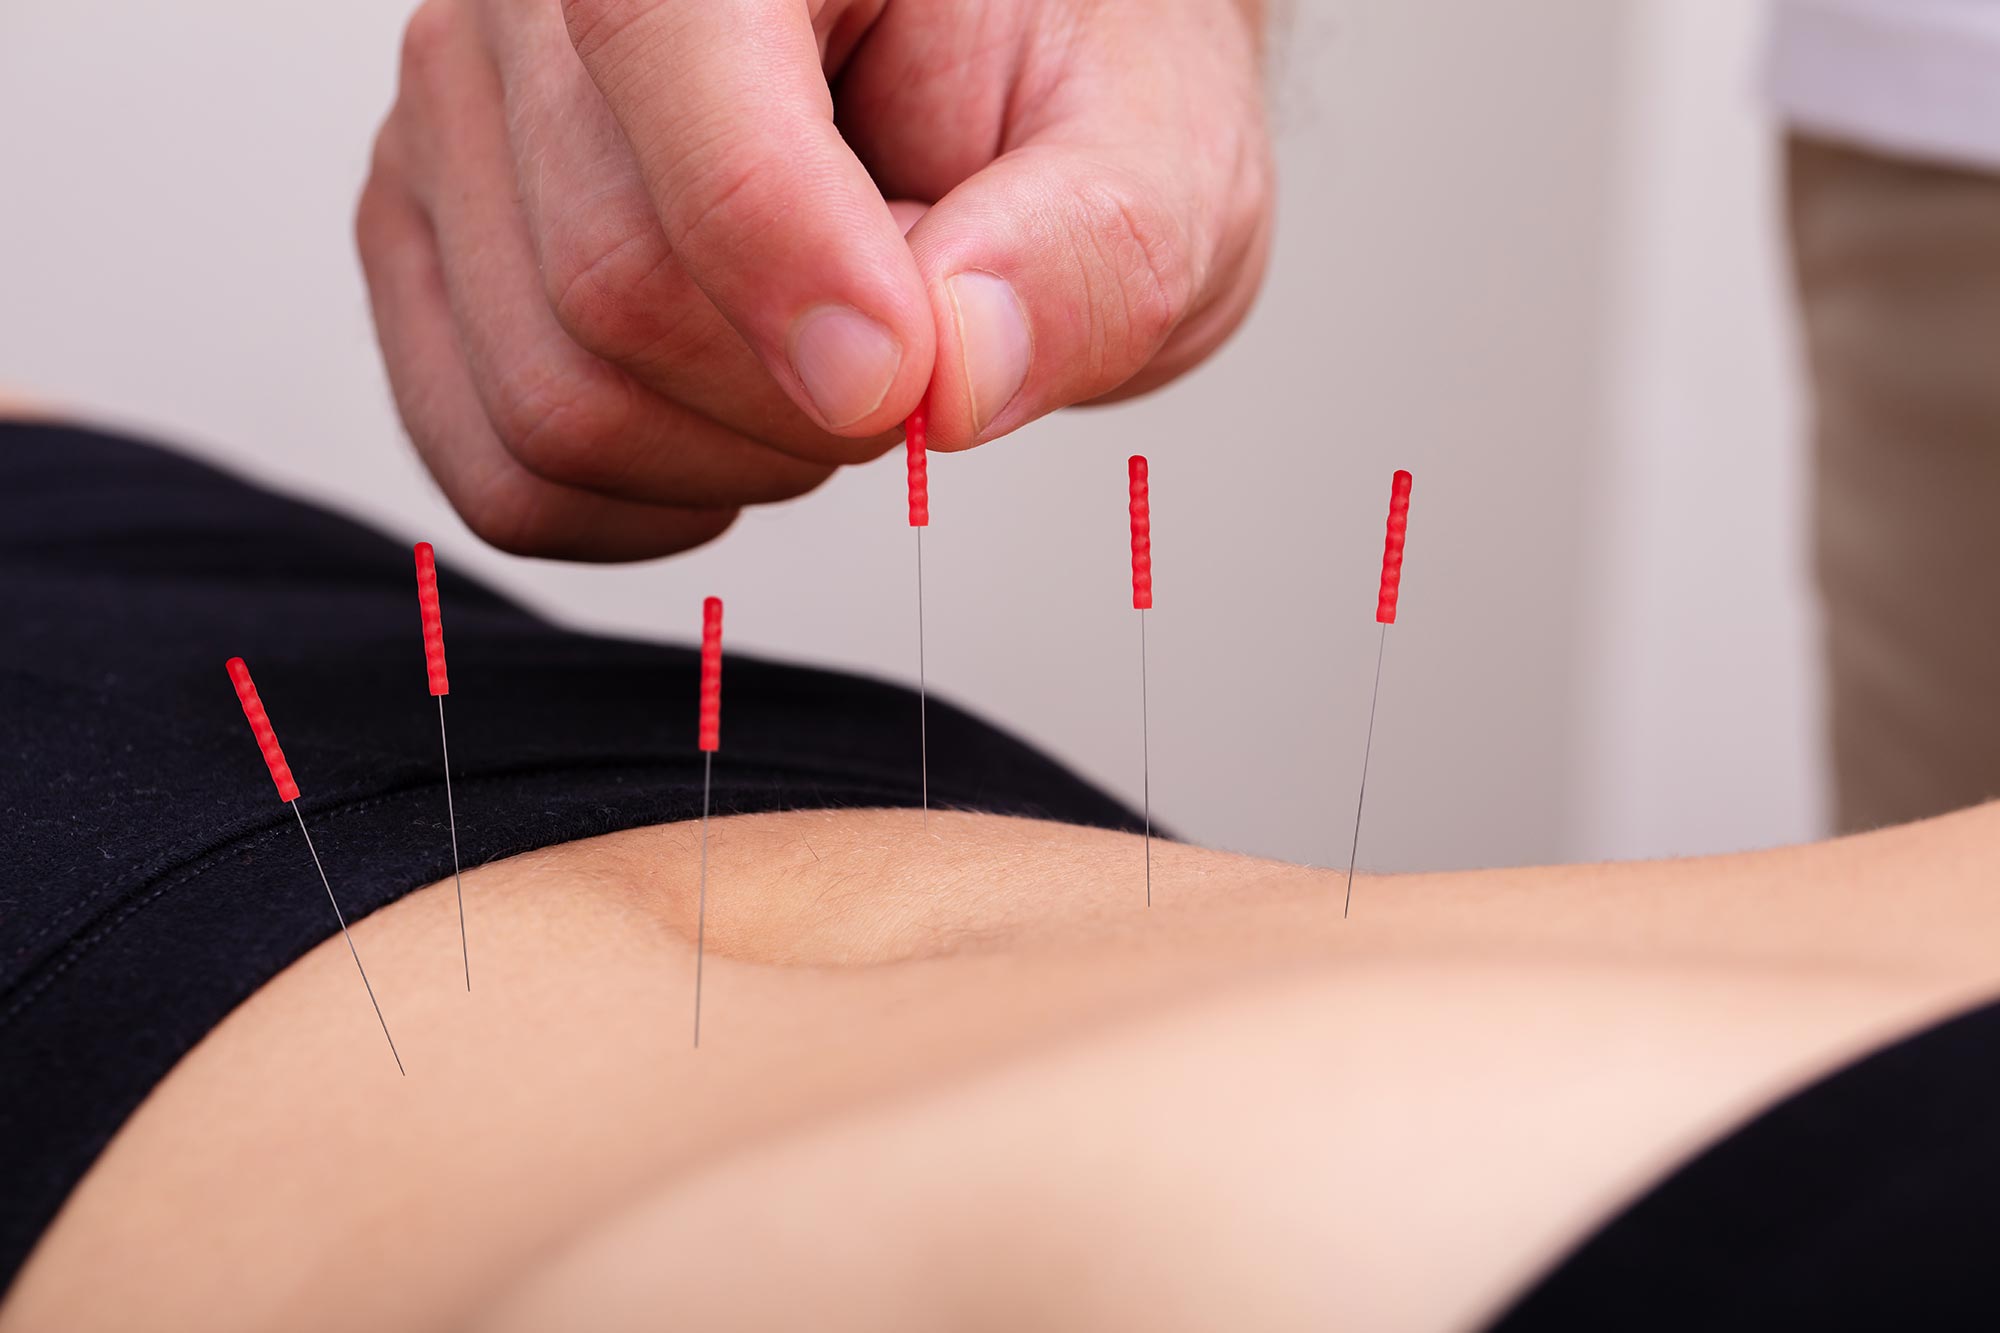 Dry Needling Acupuncture at Acu for Athletes